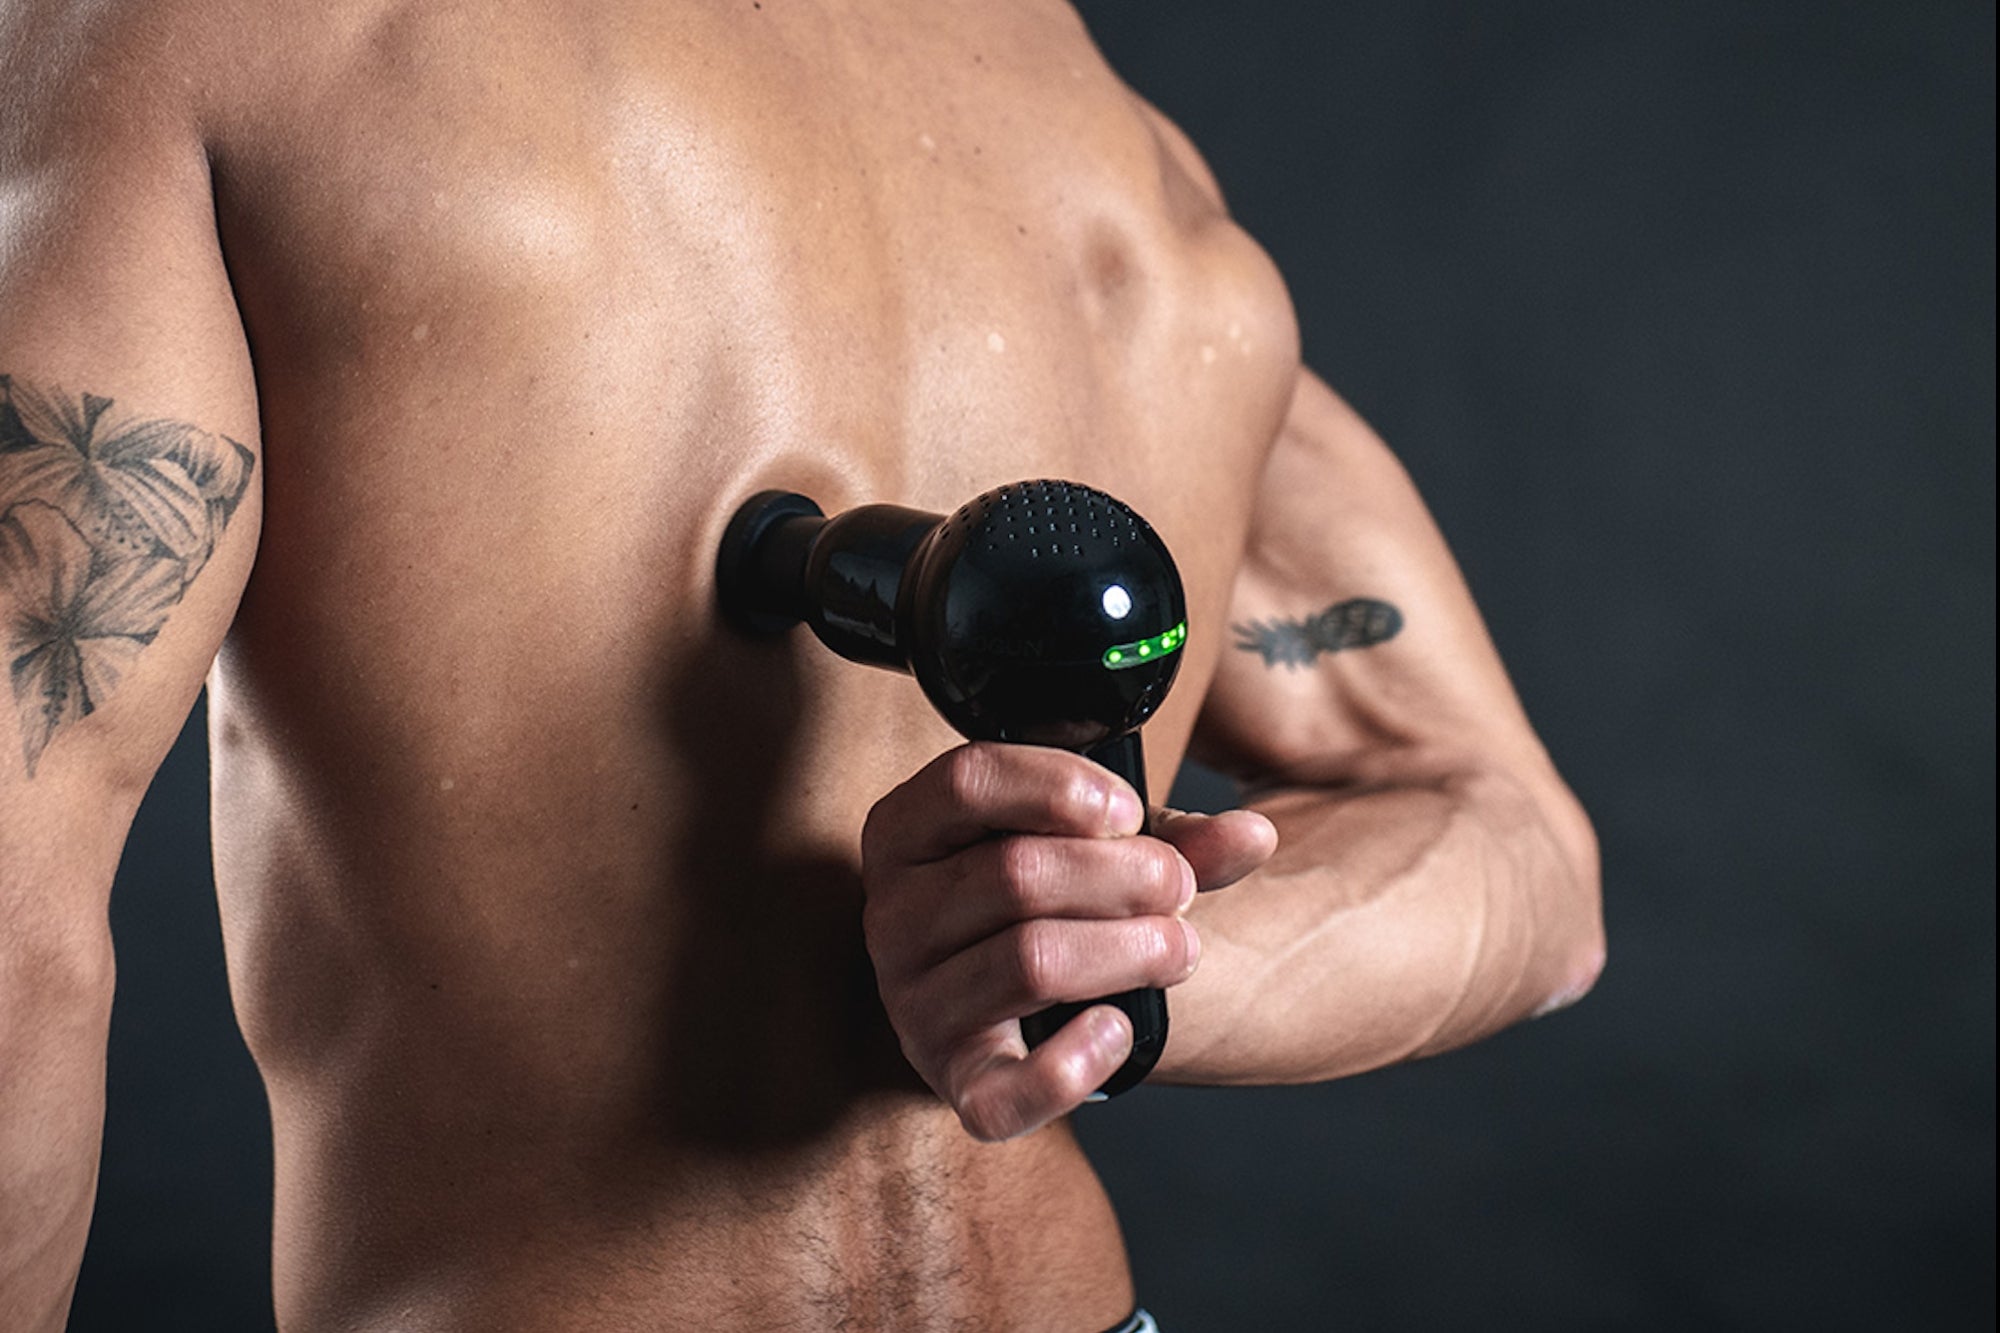 Treat Muscle Pain and Soreness with One of the Strongest Mini Massage Guns on the Market